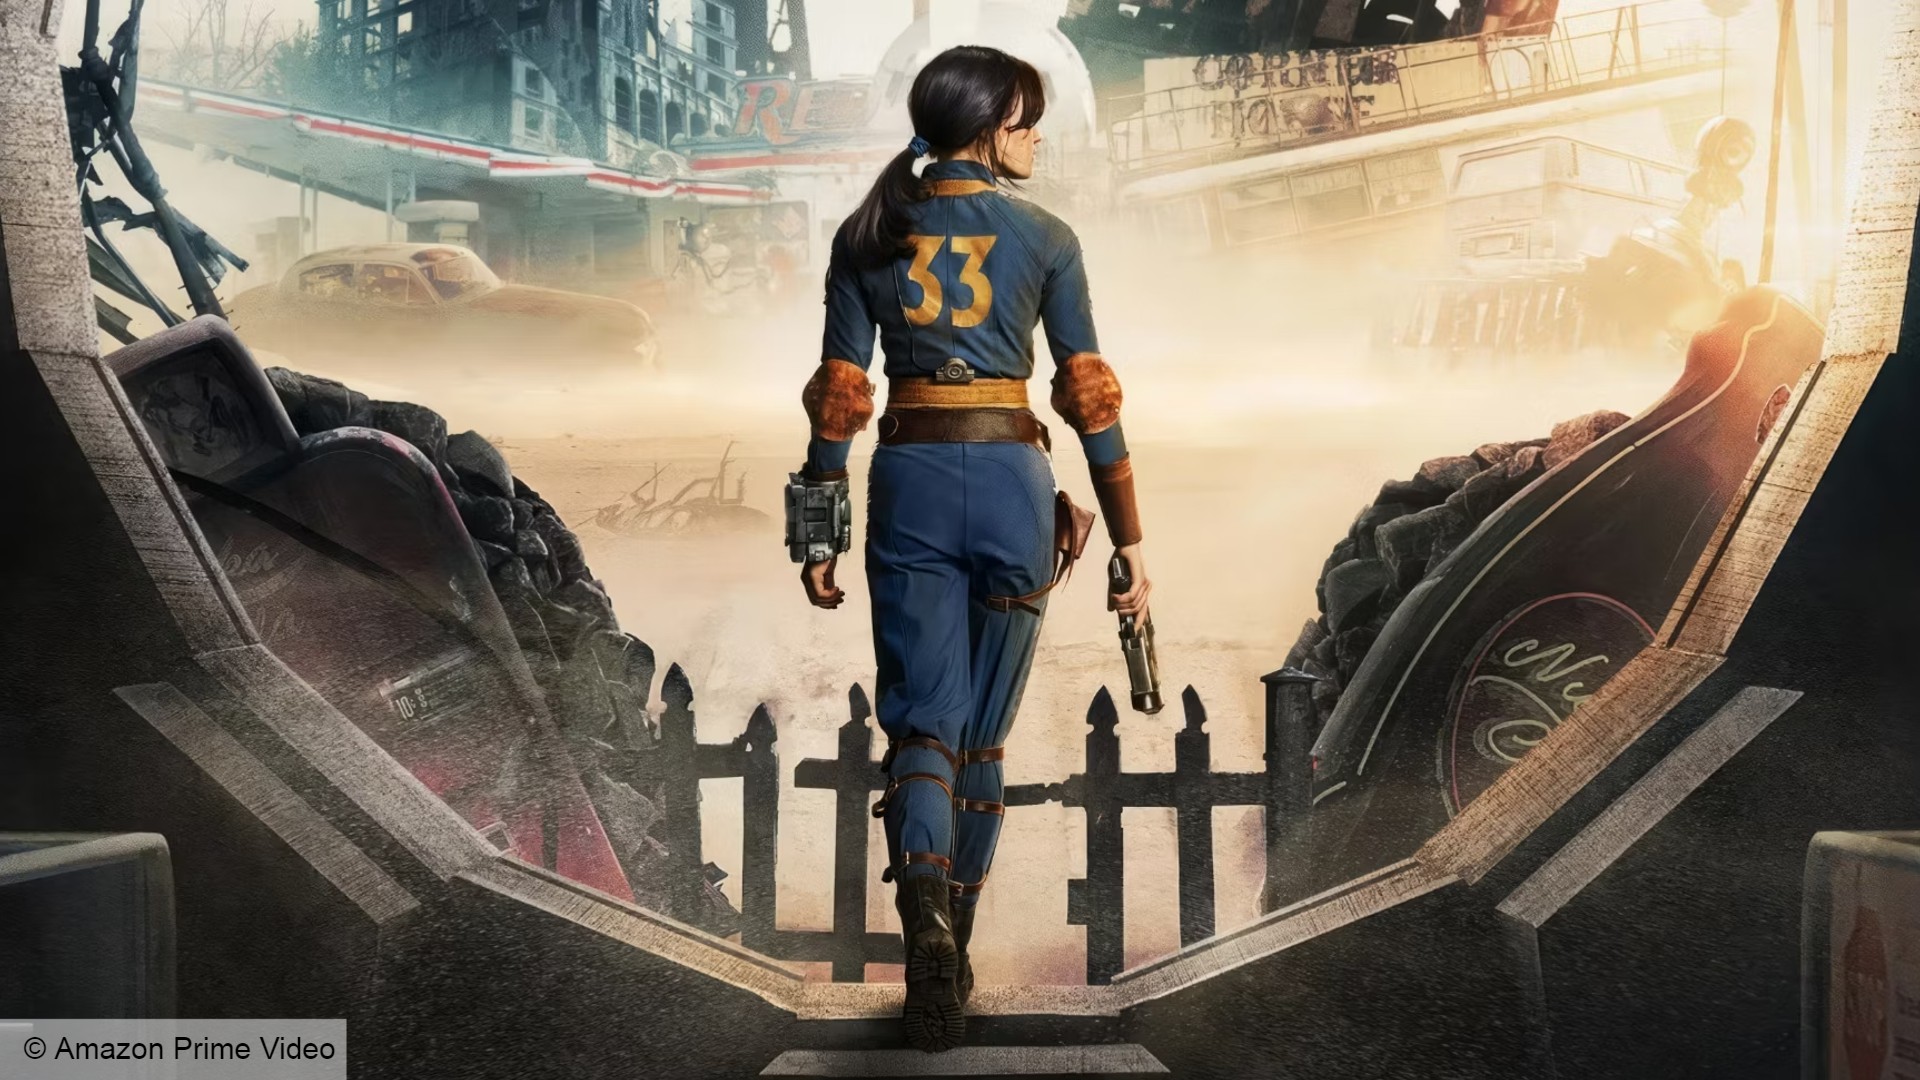 A woman with tied-back brown hair wearing a blue and yellow jumpsuit with '33' on the back walks through a door into a ruined cityscape